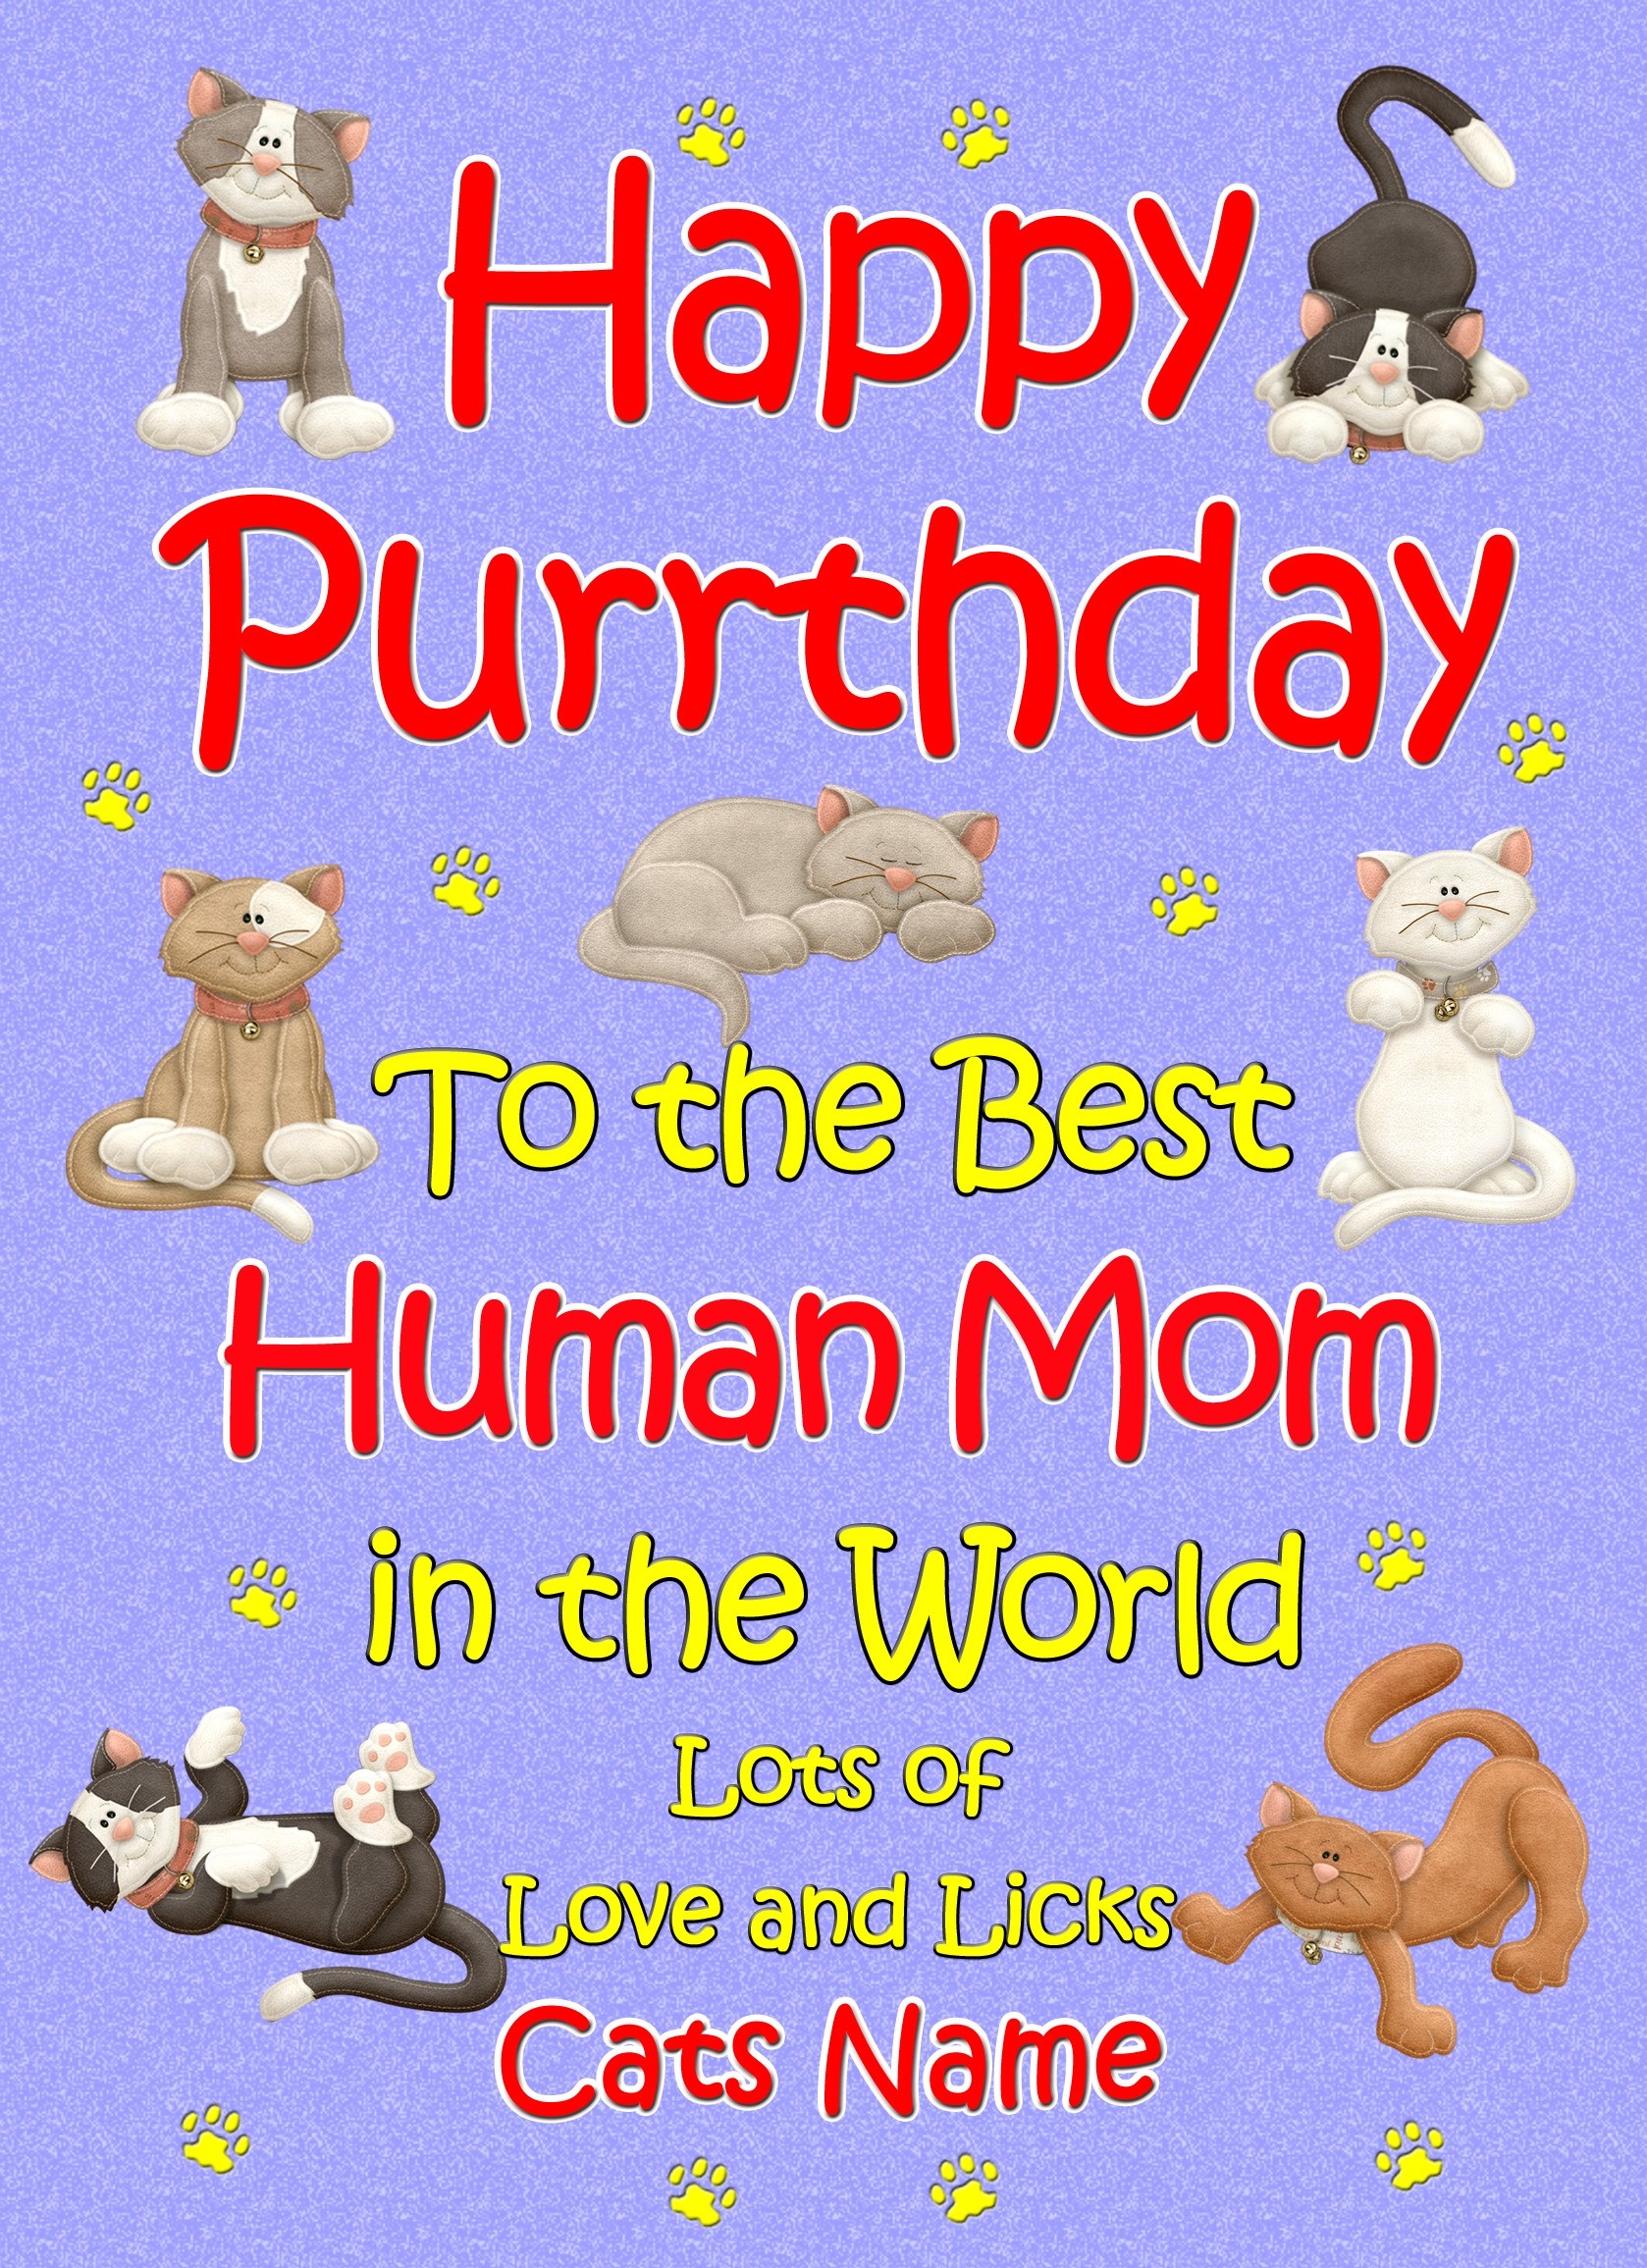 Personalised From The Cat Birthday Card (Lilac, Human Mom, Happy Purrthday)